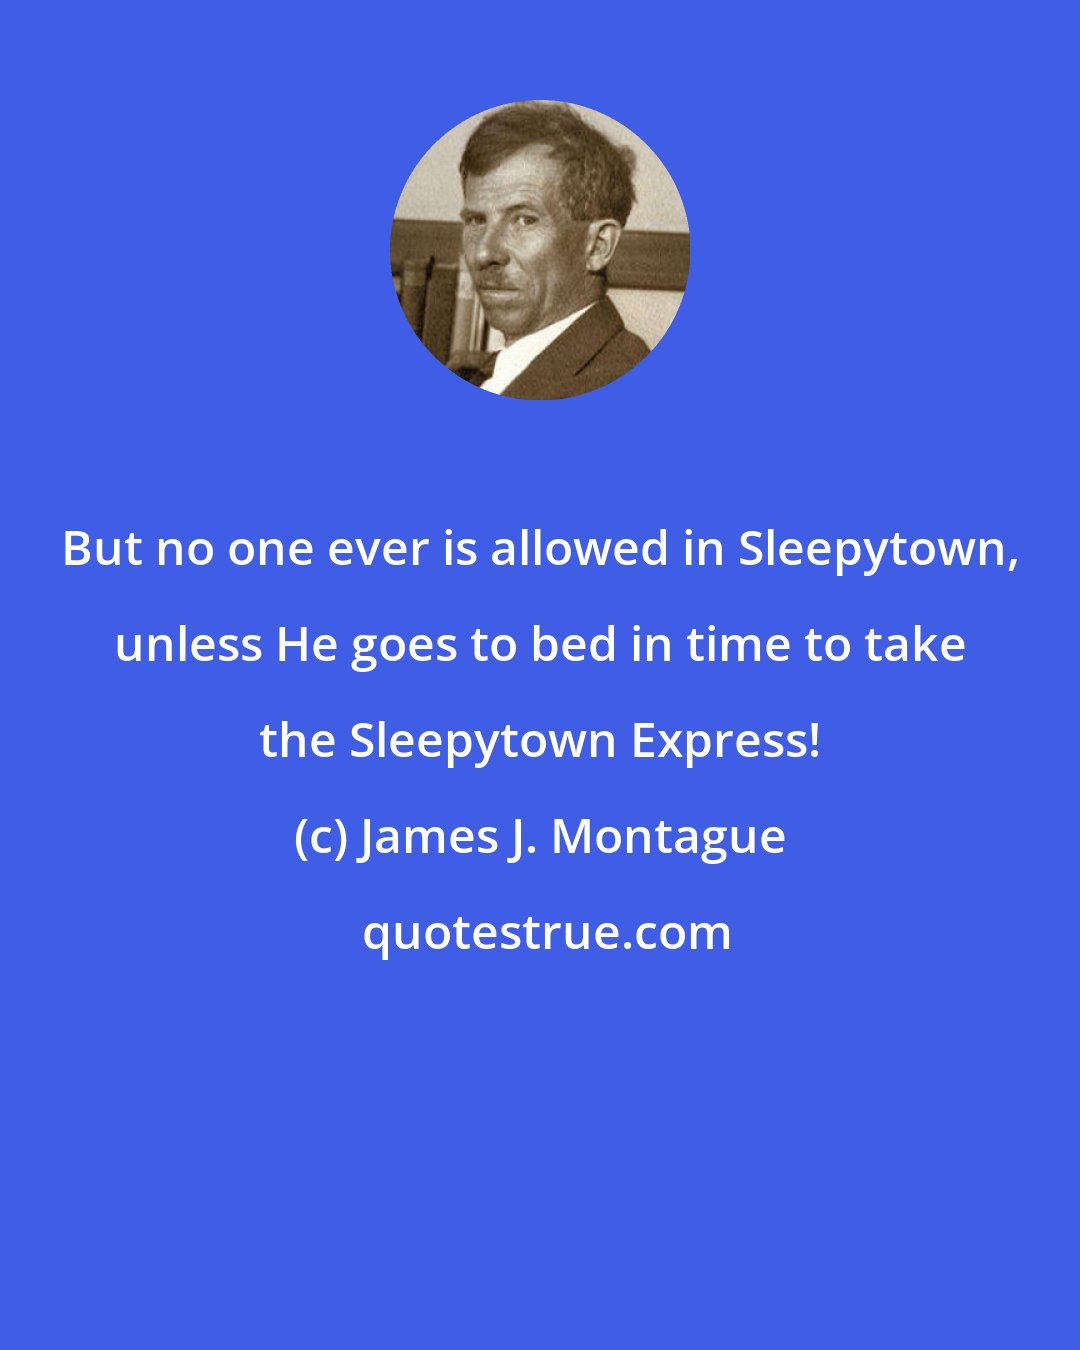 James J. Montague: But no one ever is allowed in Sleepytown, unless He goes to bed in time to take the Sleepytown Express!